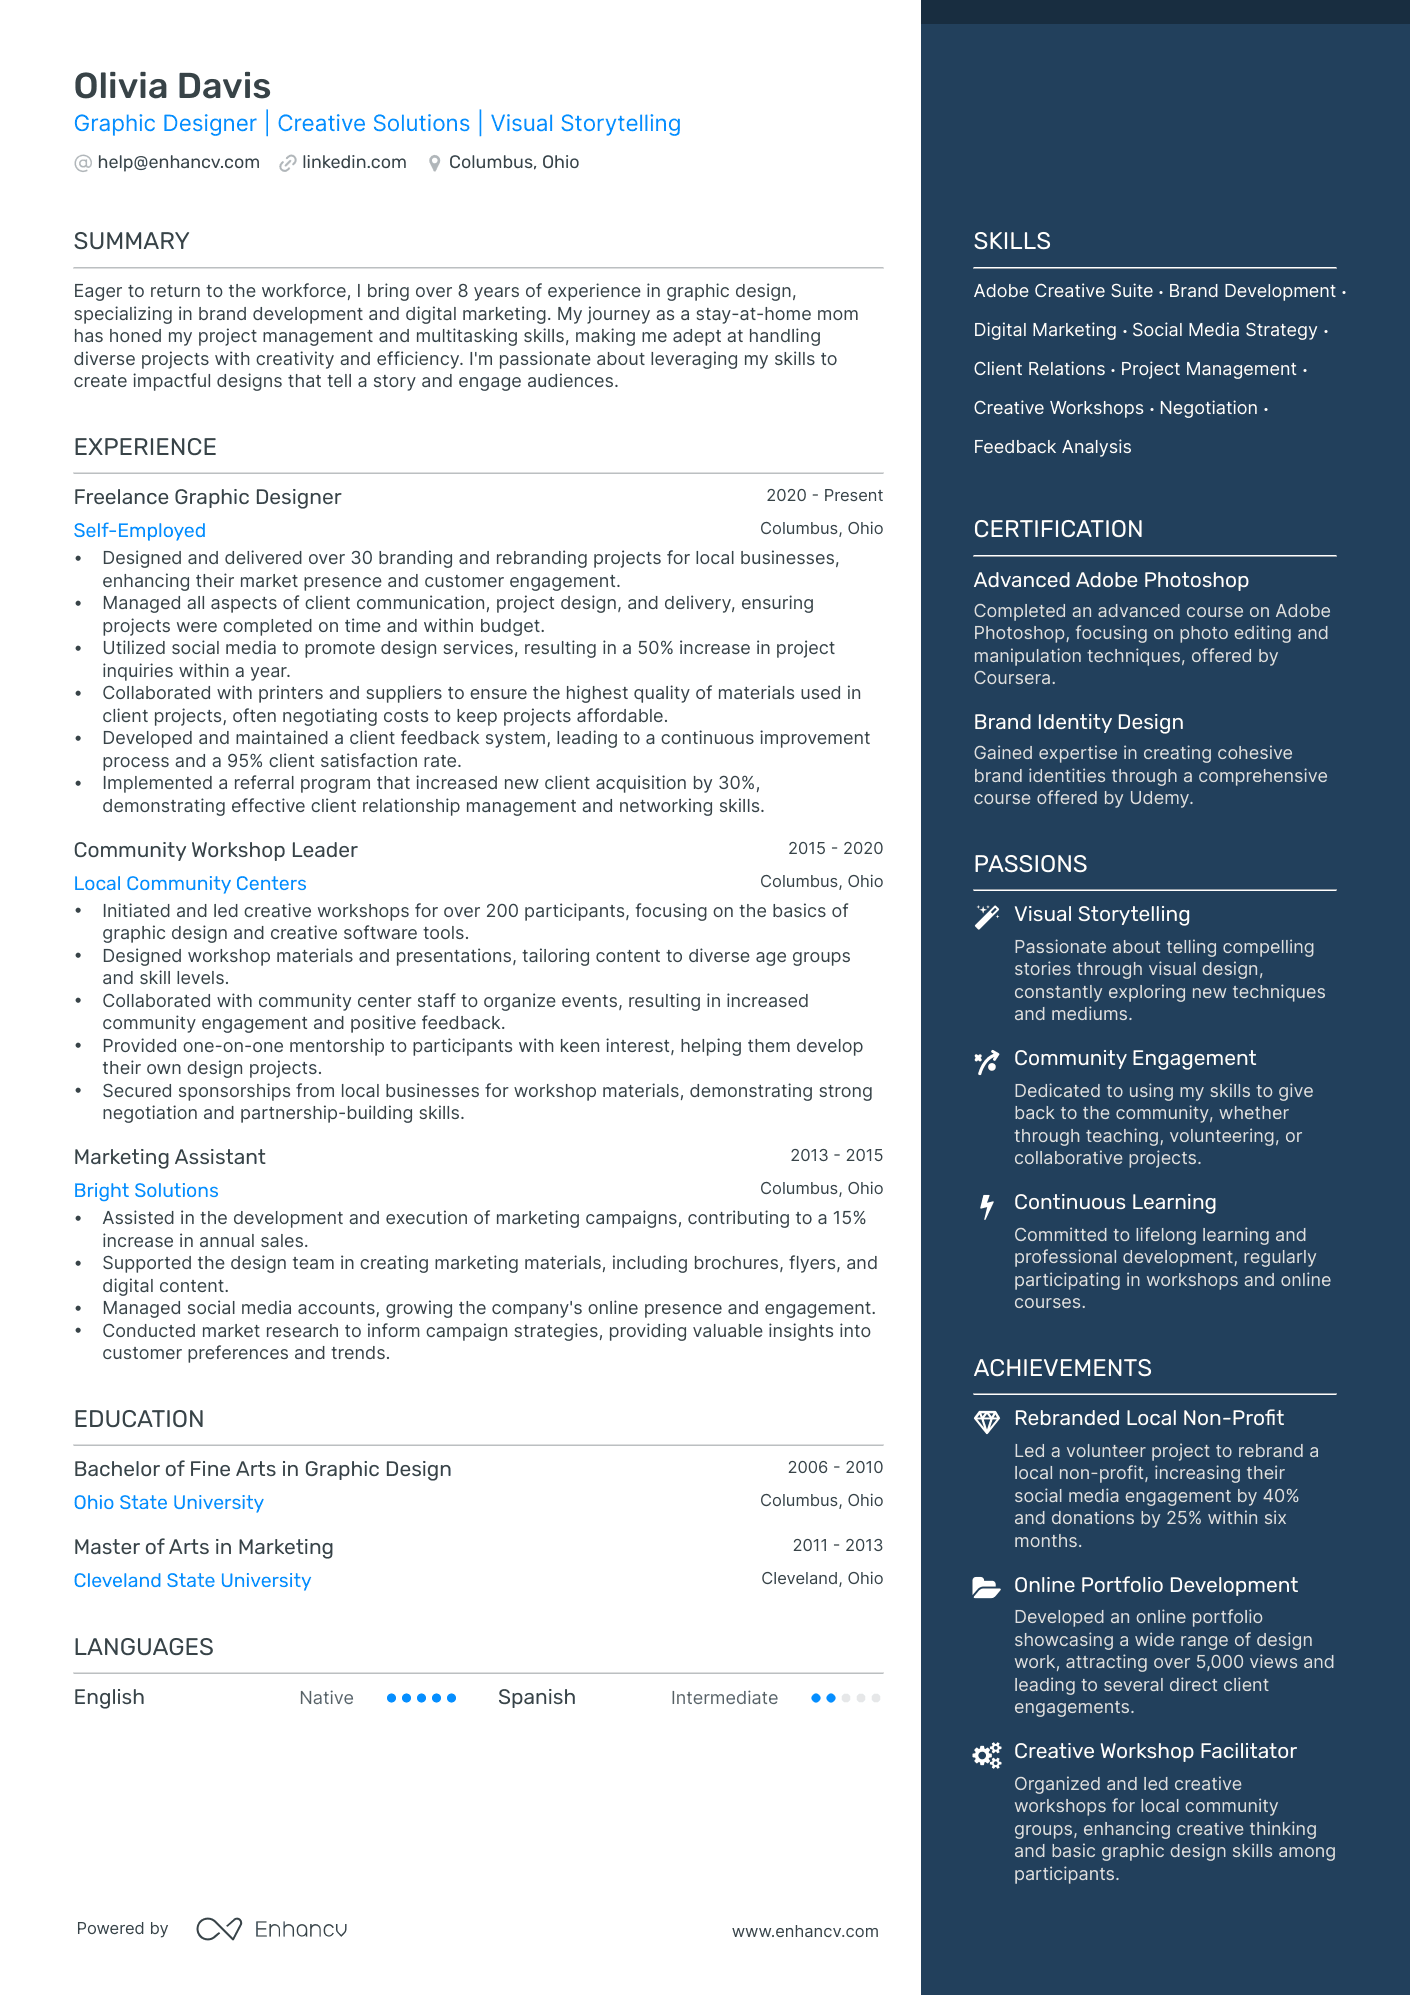 Graphic Designer | Creative Solutions | Visual Storytelling resume example